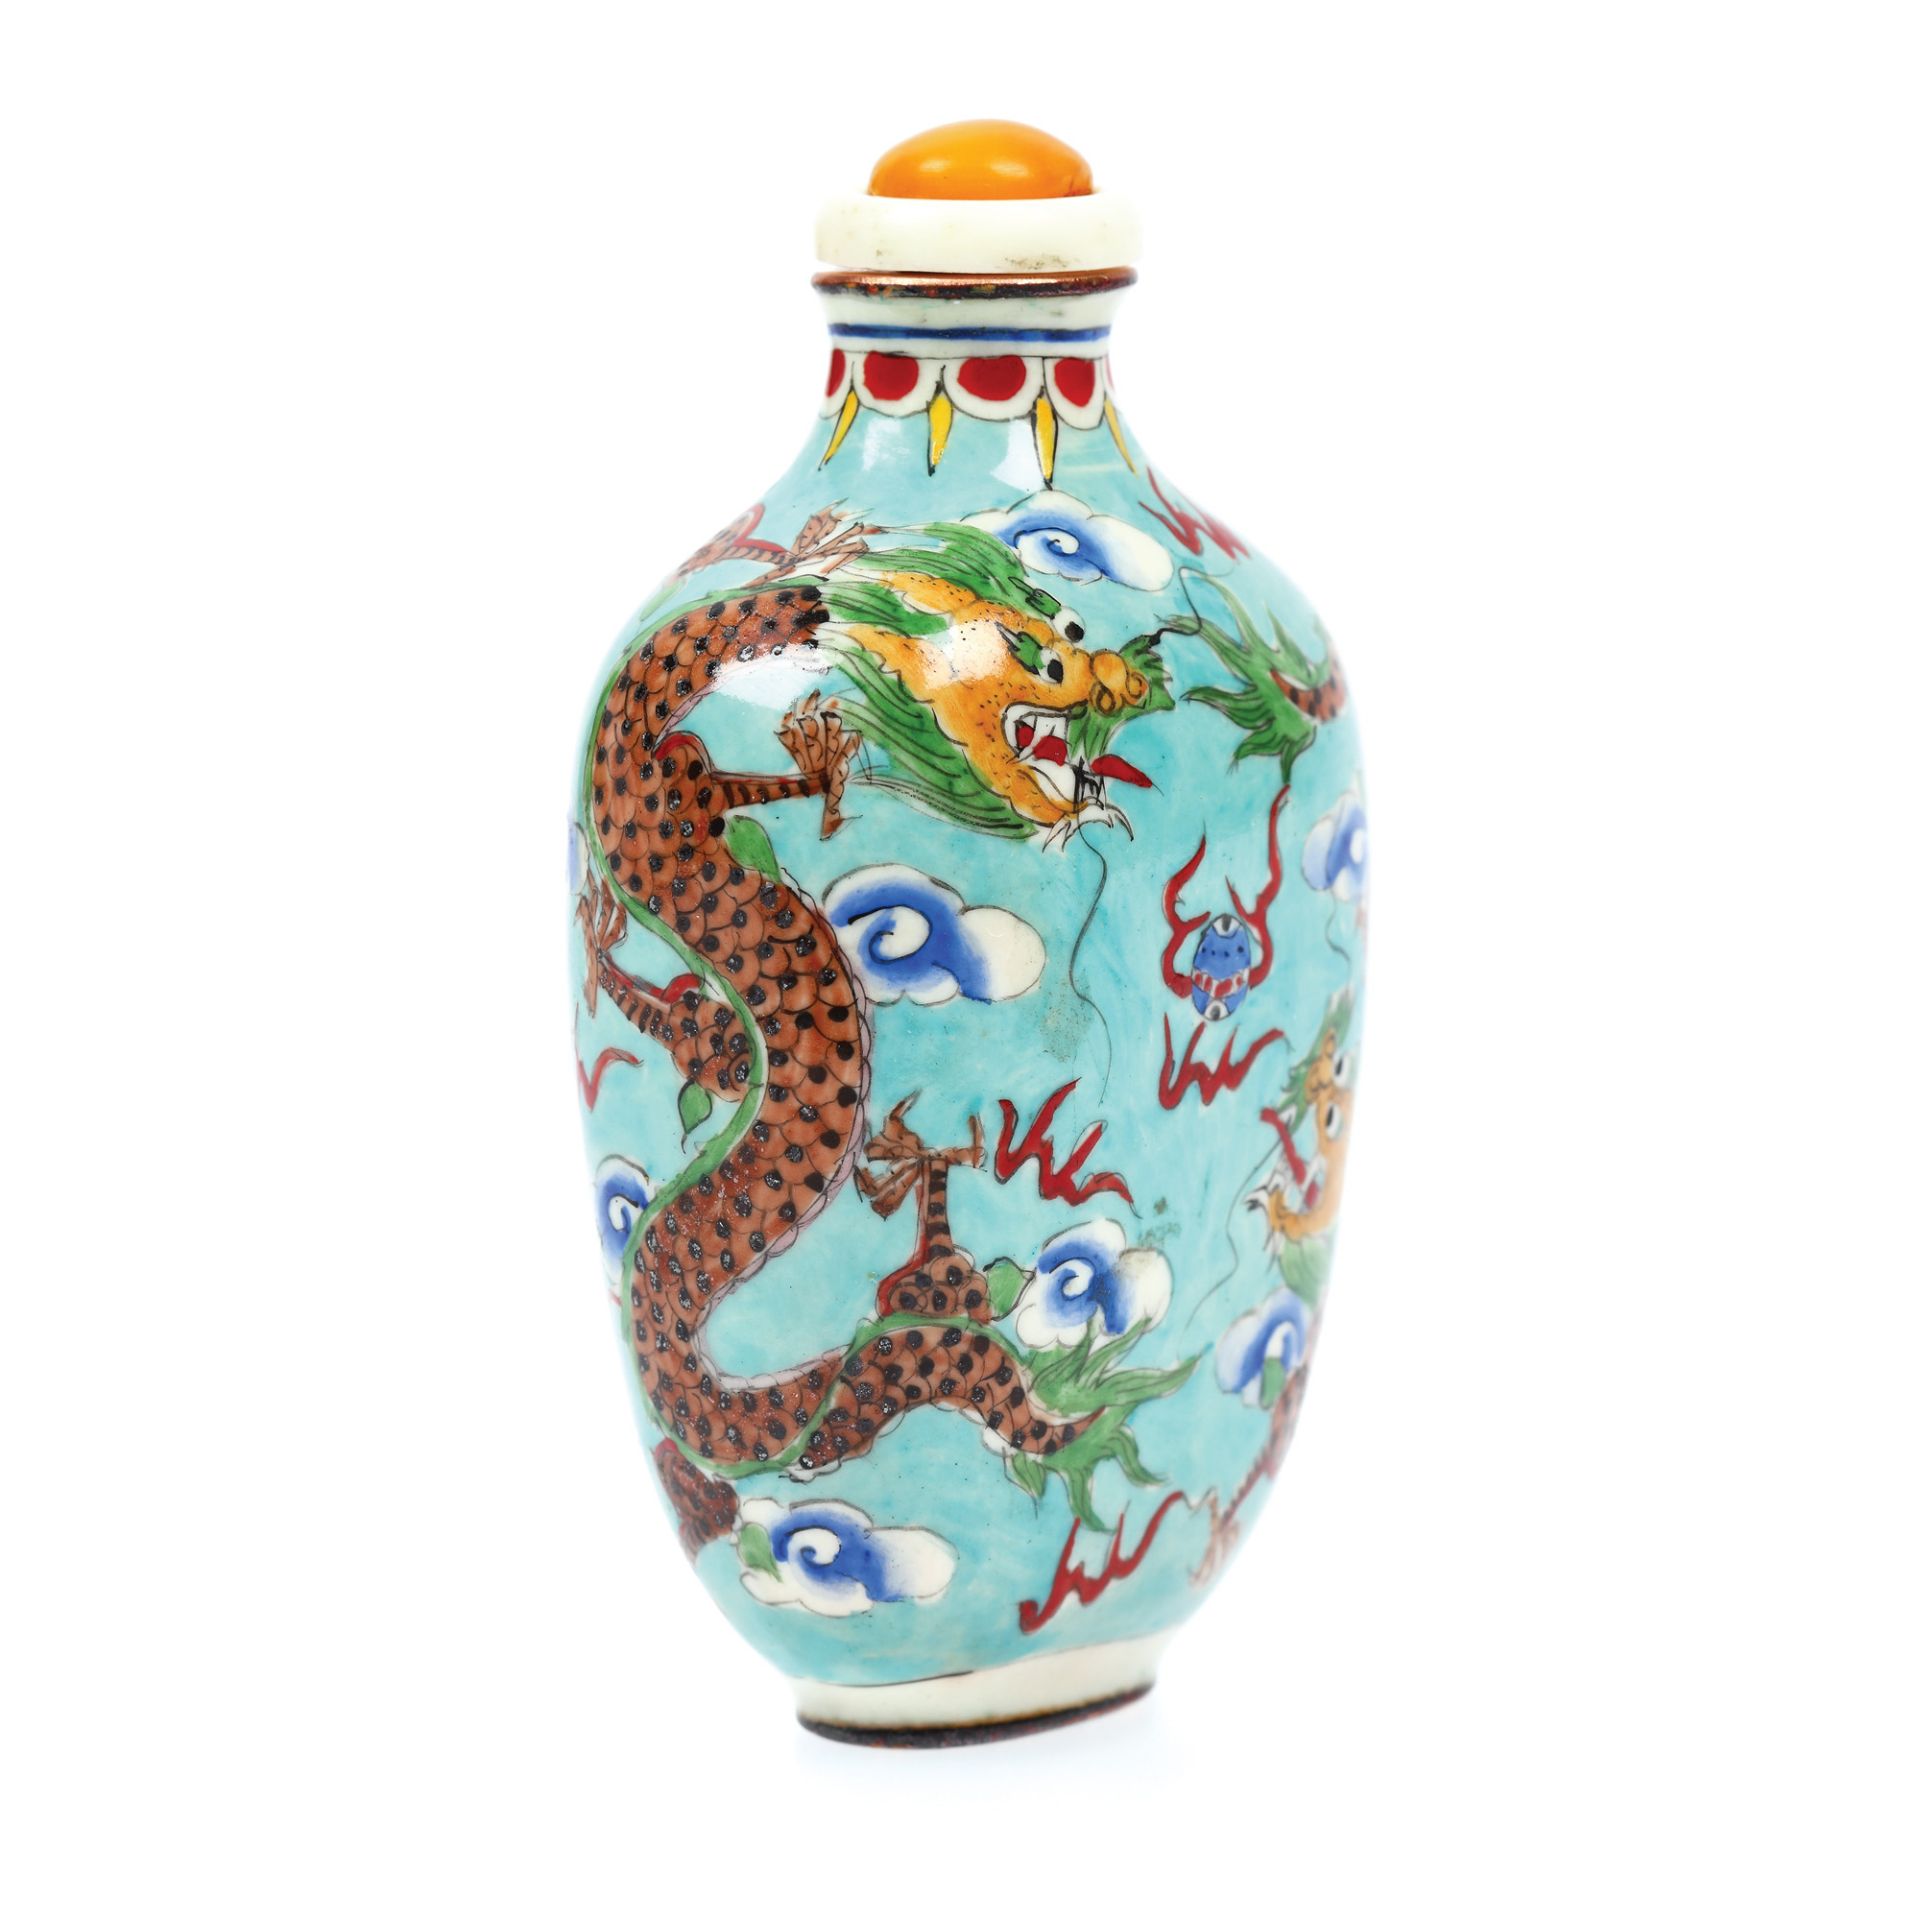 Recipient for sniffing, Beijing enamel, ivory and amber stopper, decorated with dragons hunting pear - Image 3 of 4